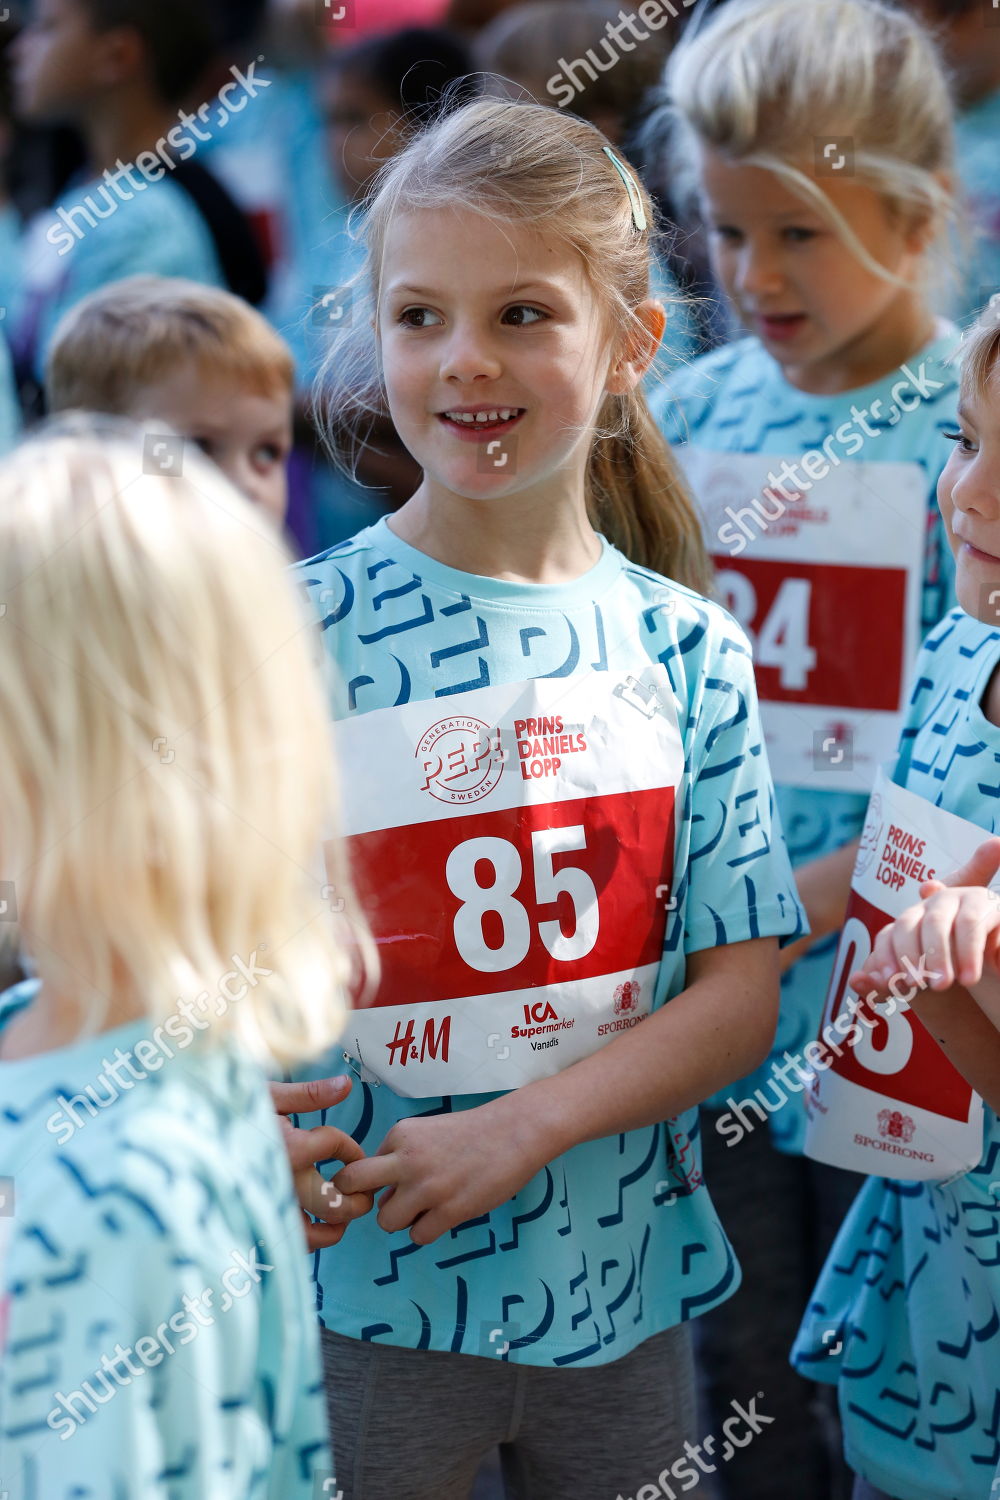 race-and-pep-day-stockholm-sweden-shutterstock-editorial-9884111l.jpg